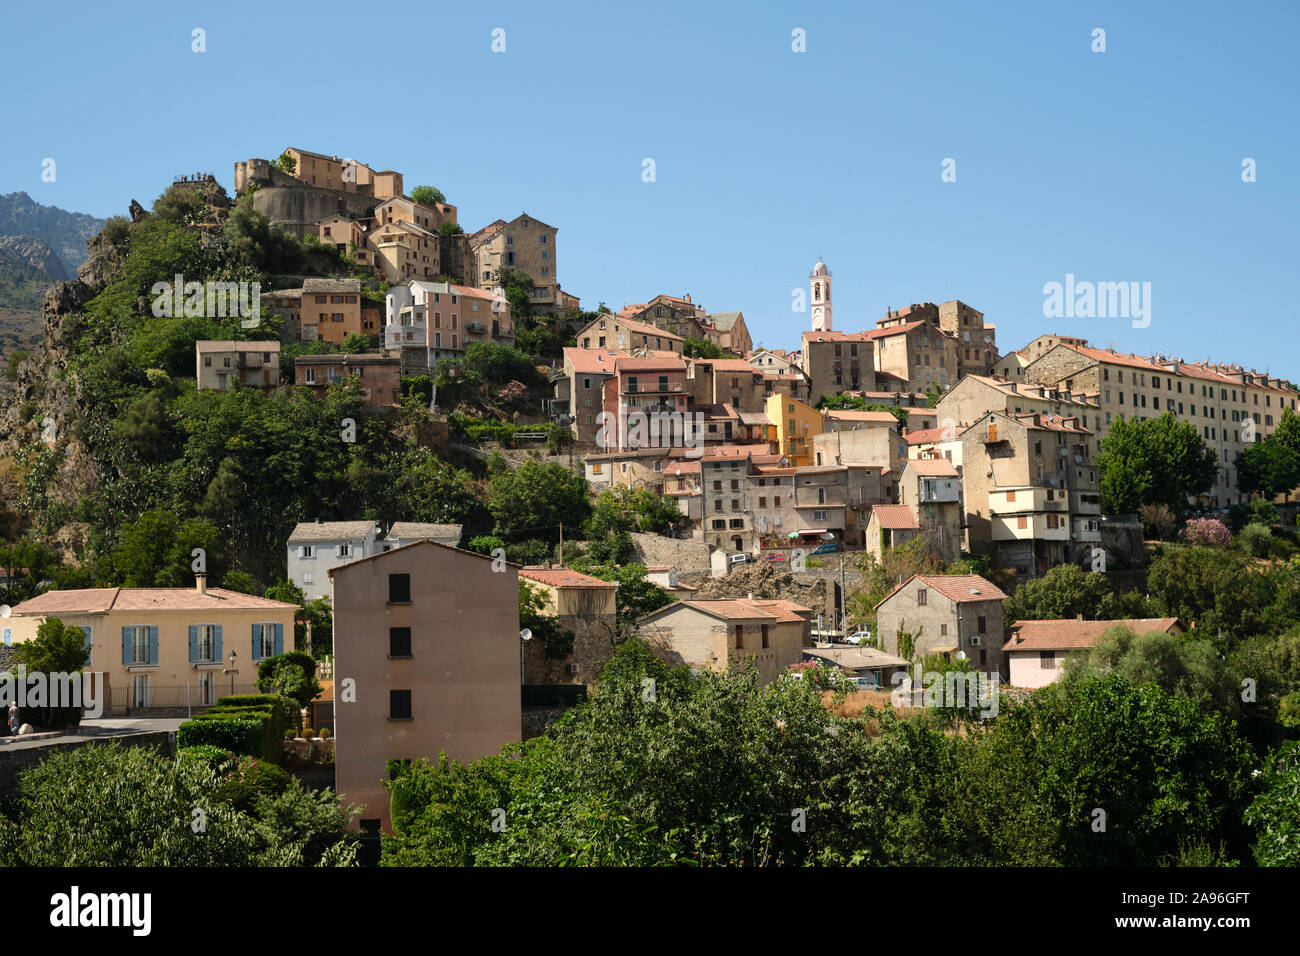 The Citadel and the hilltop Old Town of Corte in central Corsica,  Haute-Corse, France, Europe - Corsica mountain village landscape Stock Photo